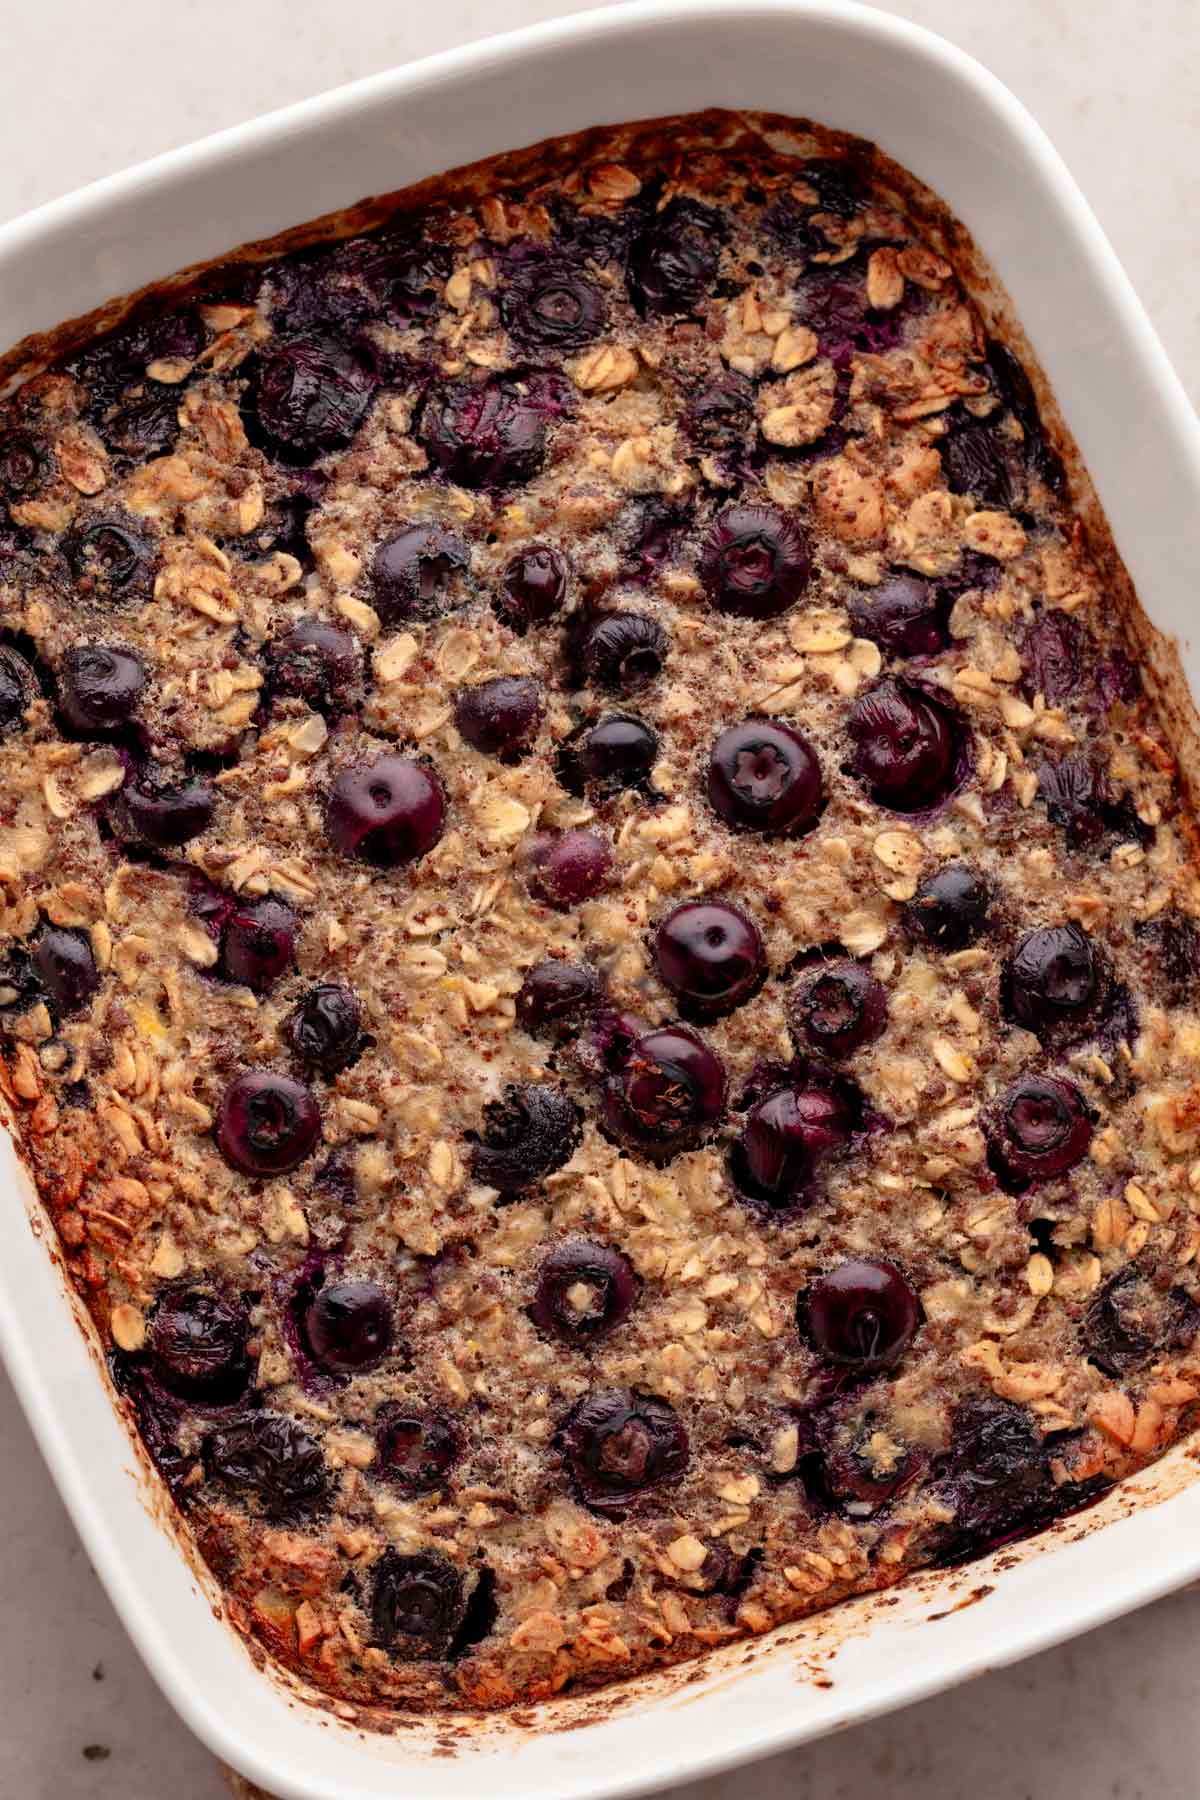 freshly baked oatmeal with blueberries and banana.